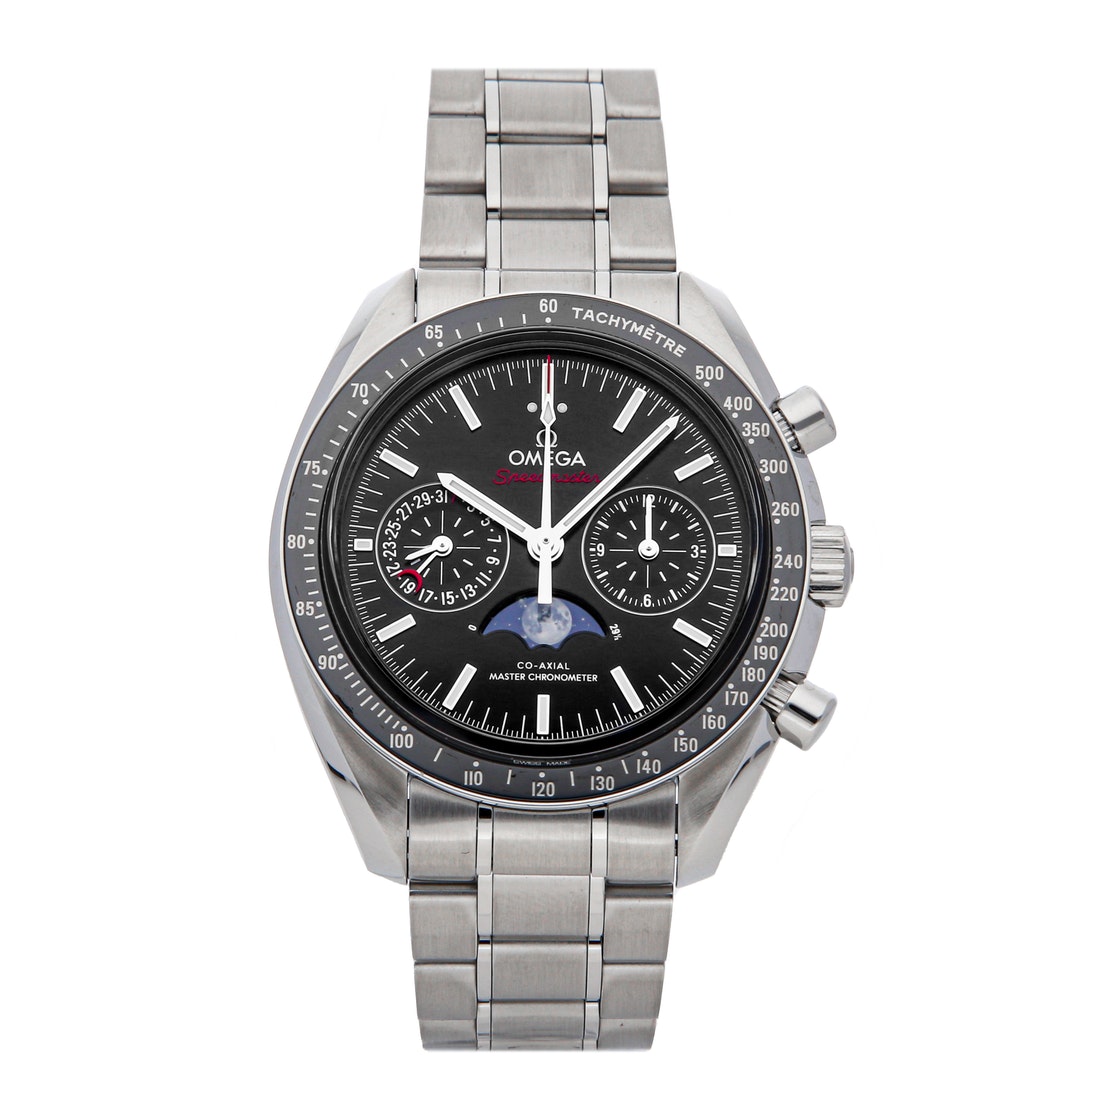 Pre-owned Omega Black Stainless Steel Speedmaster Moon Phase Chronograph 304.30.44.52.01.001 Men's Wristwatch 44 Mm